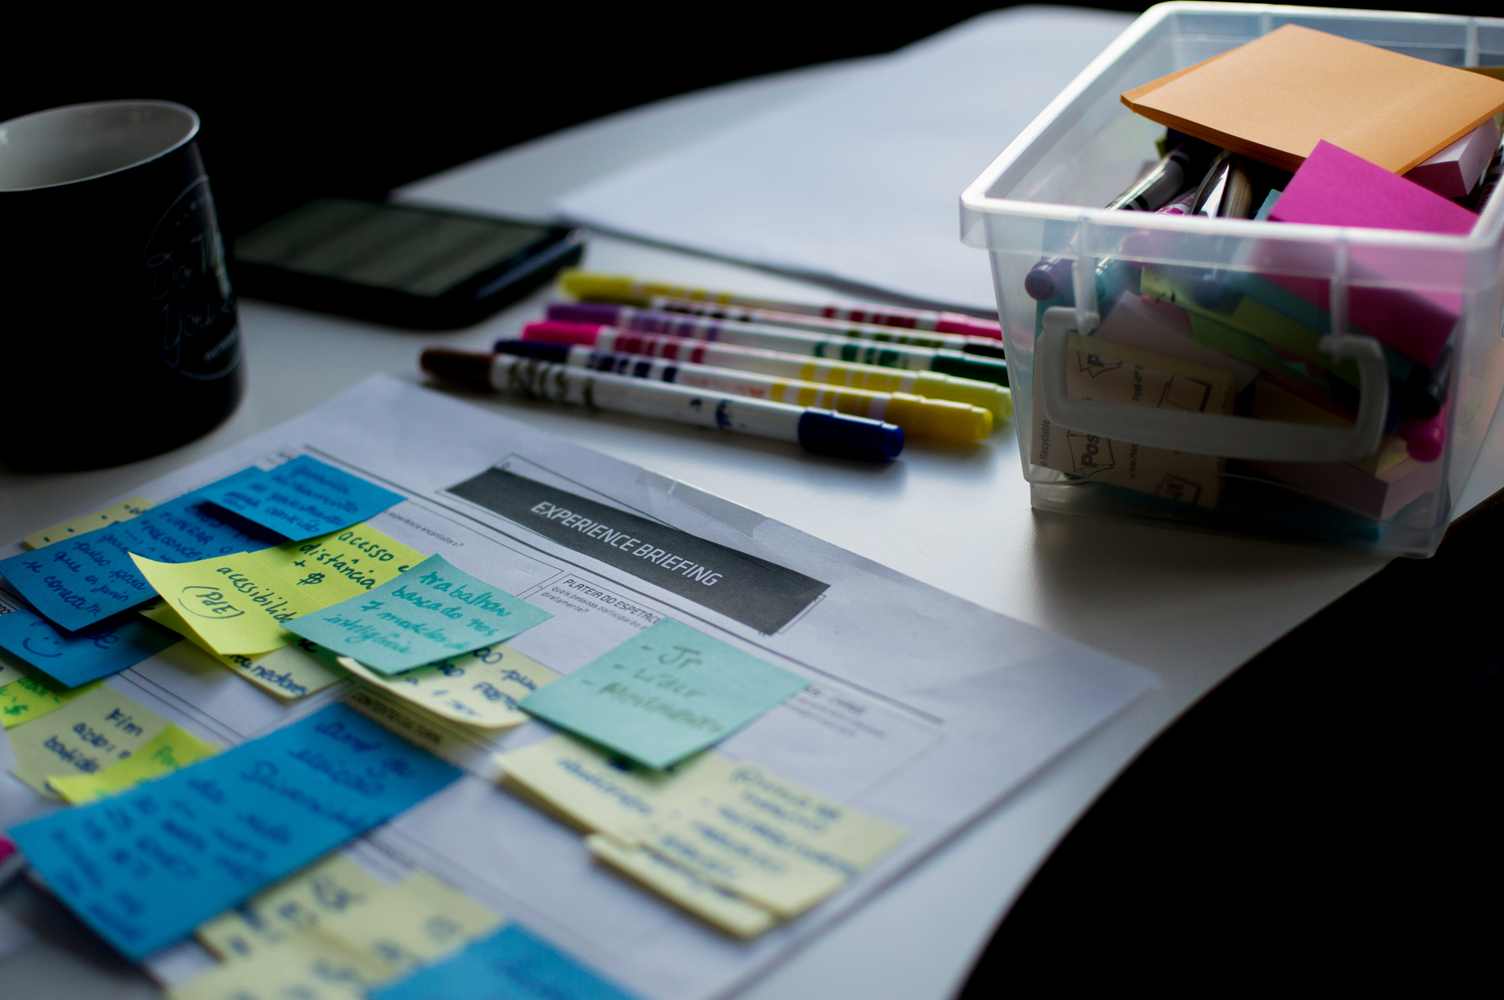 Image of a work desk with post-it notes, markers, and a bin of note-taking tools